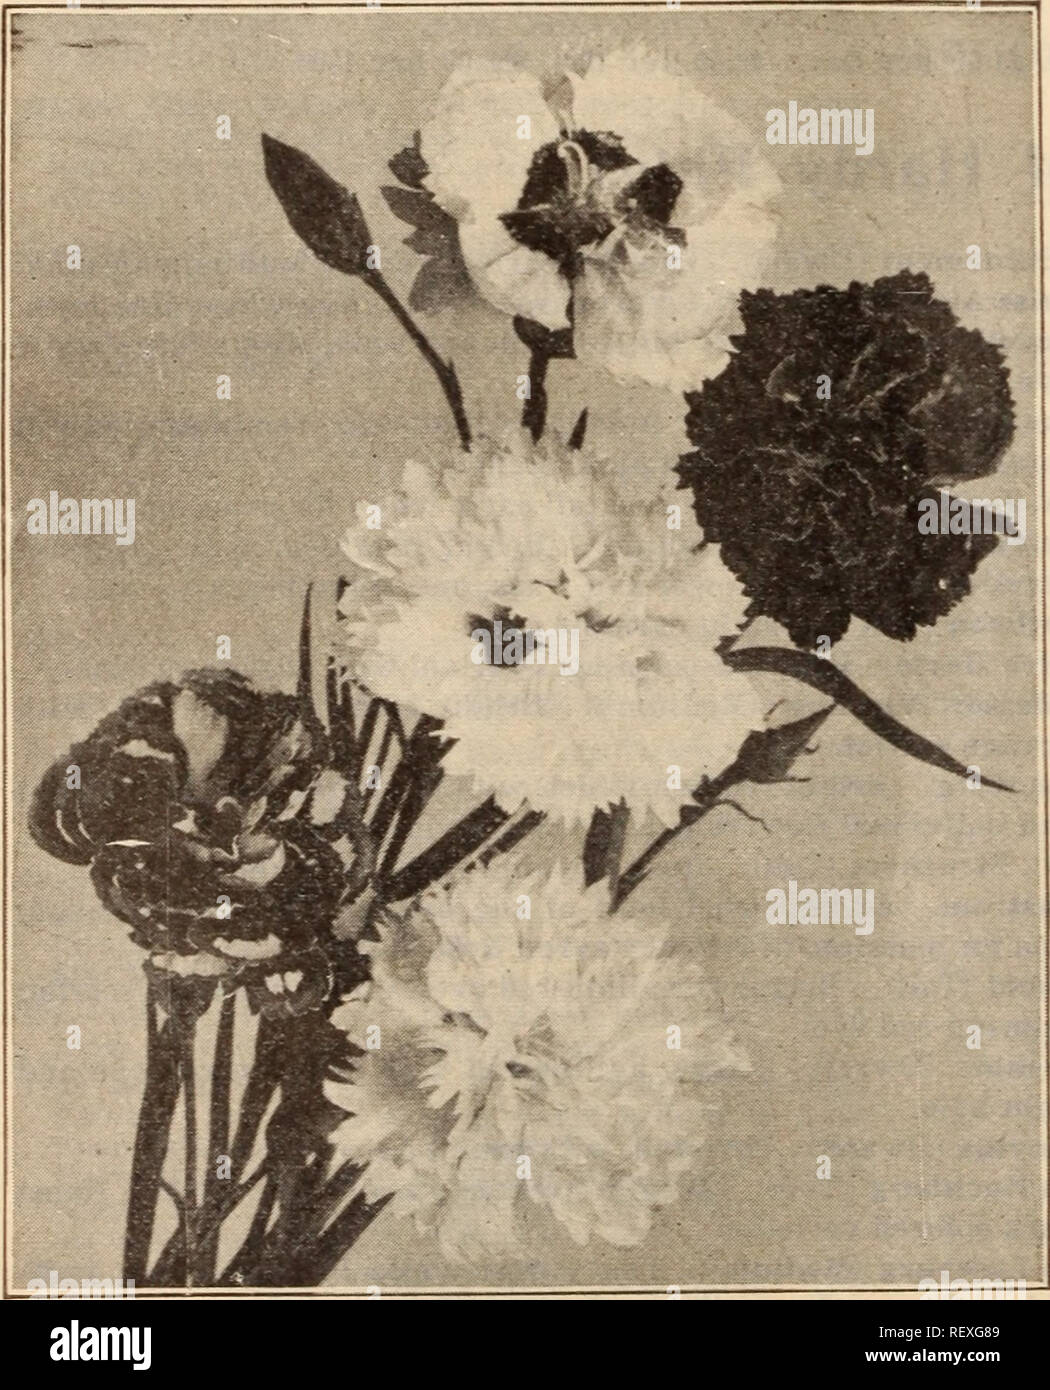 . Dreer's wholesale price list / Henry A. Dreer.. Nursery Catalogue. 38 HENRY A. DREER, PHILADELPHIA, PA., WHOLESALE PRICE LIST A New Race of Phloxes, P. Arendsi. At the grreat international exhibition held in London in May, 1912, where this new type of Phlox received an award of merit, no other new plant in the Hardy Perennial class attracted such great atten- tion. This new type originated through the successful crossing of the early-flowering popular Phlox Divaricata Canadensis with the showy hardy herbaceous varieties of Phlox Decussata. The plants are of vigorous, branching habit, growing Stock Photo